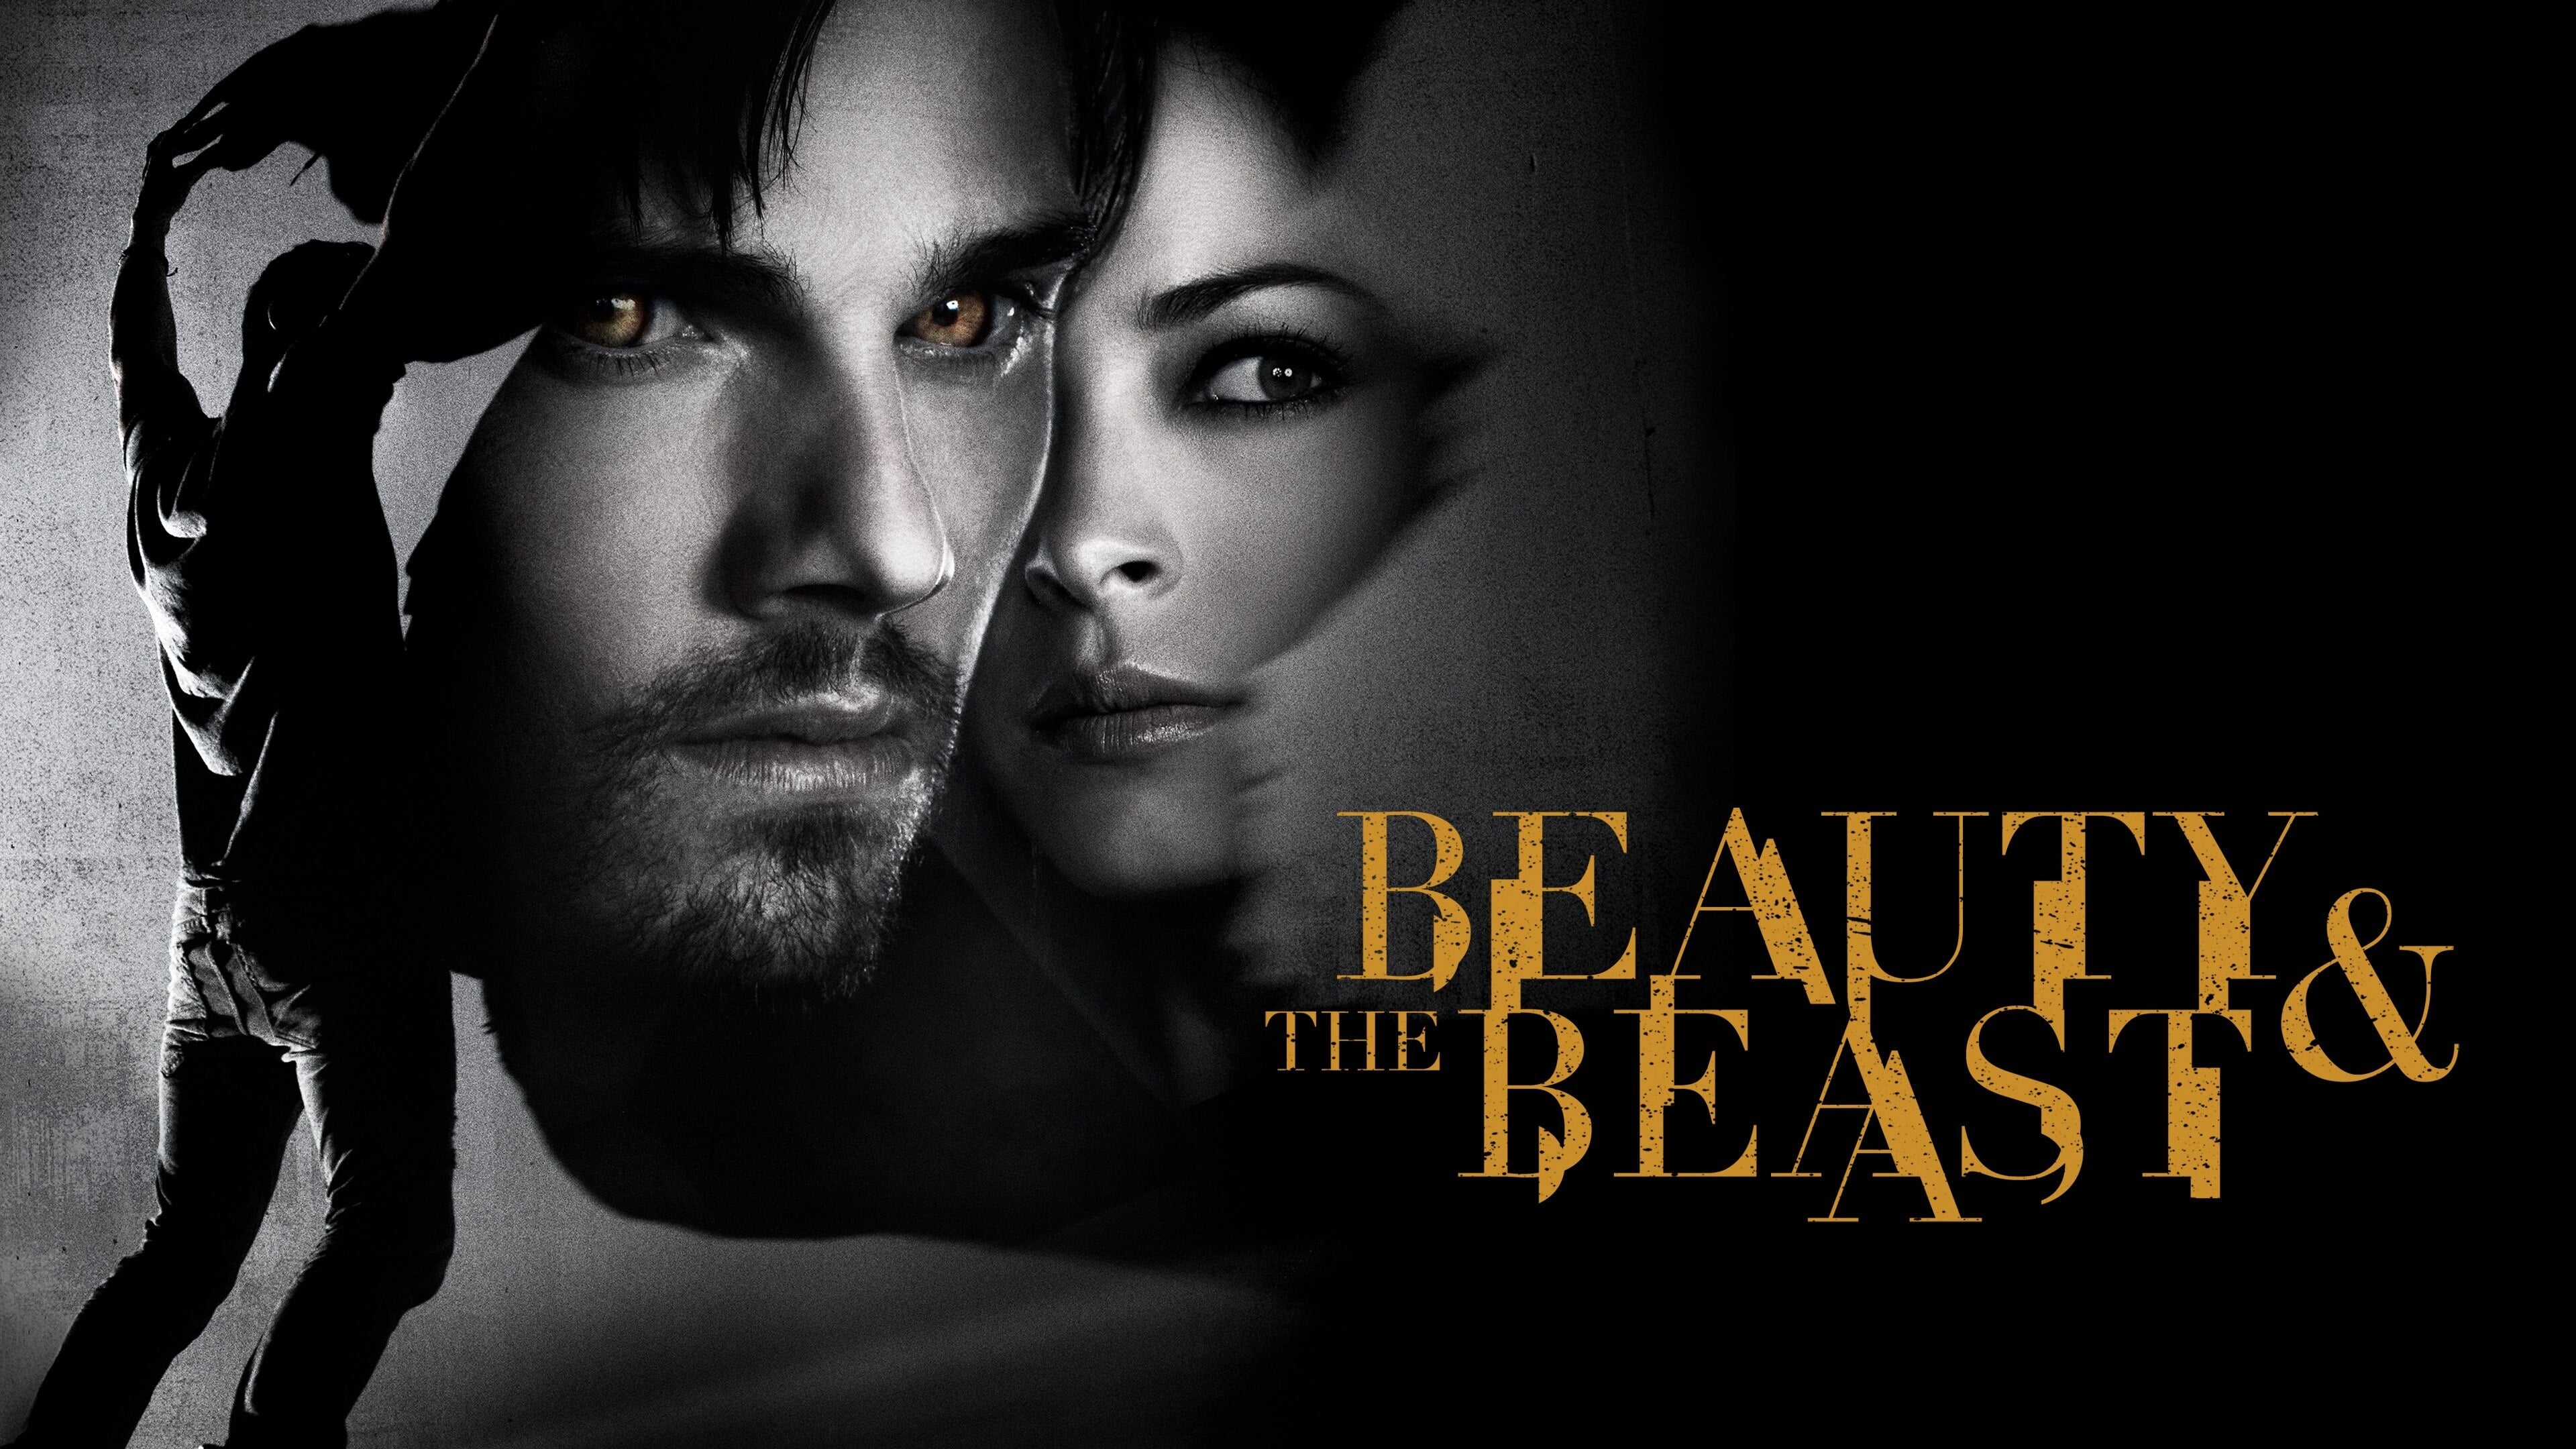 TV Show Beauty and the Beast (2012) 4k Ultra HD Wallpaper